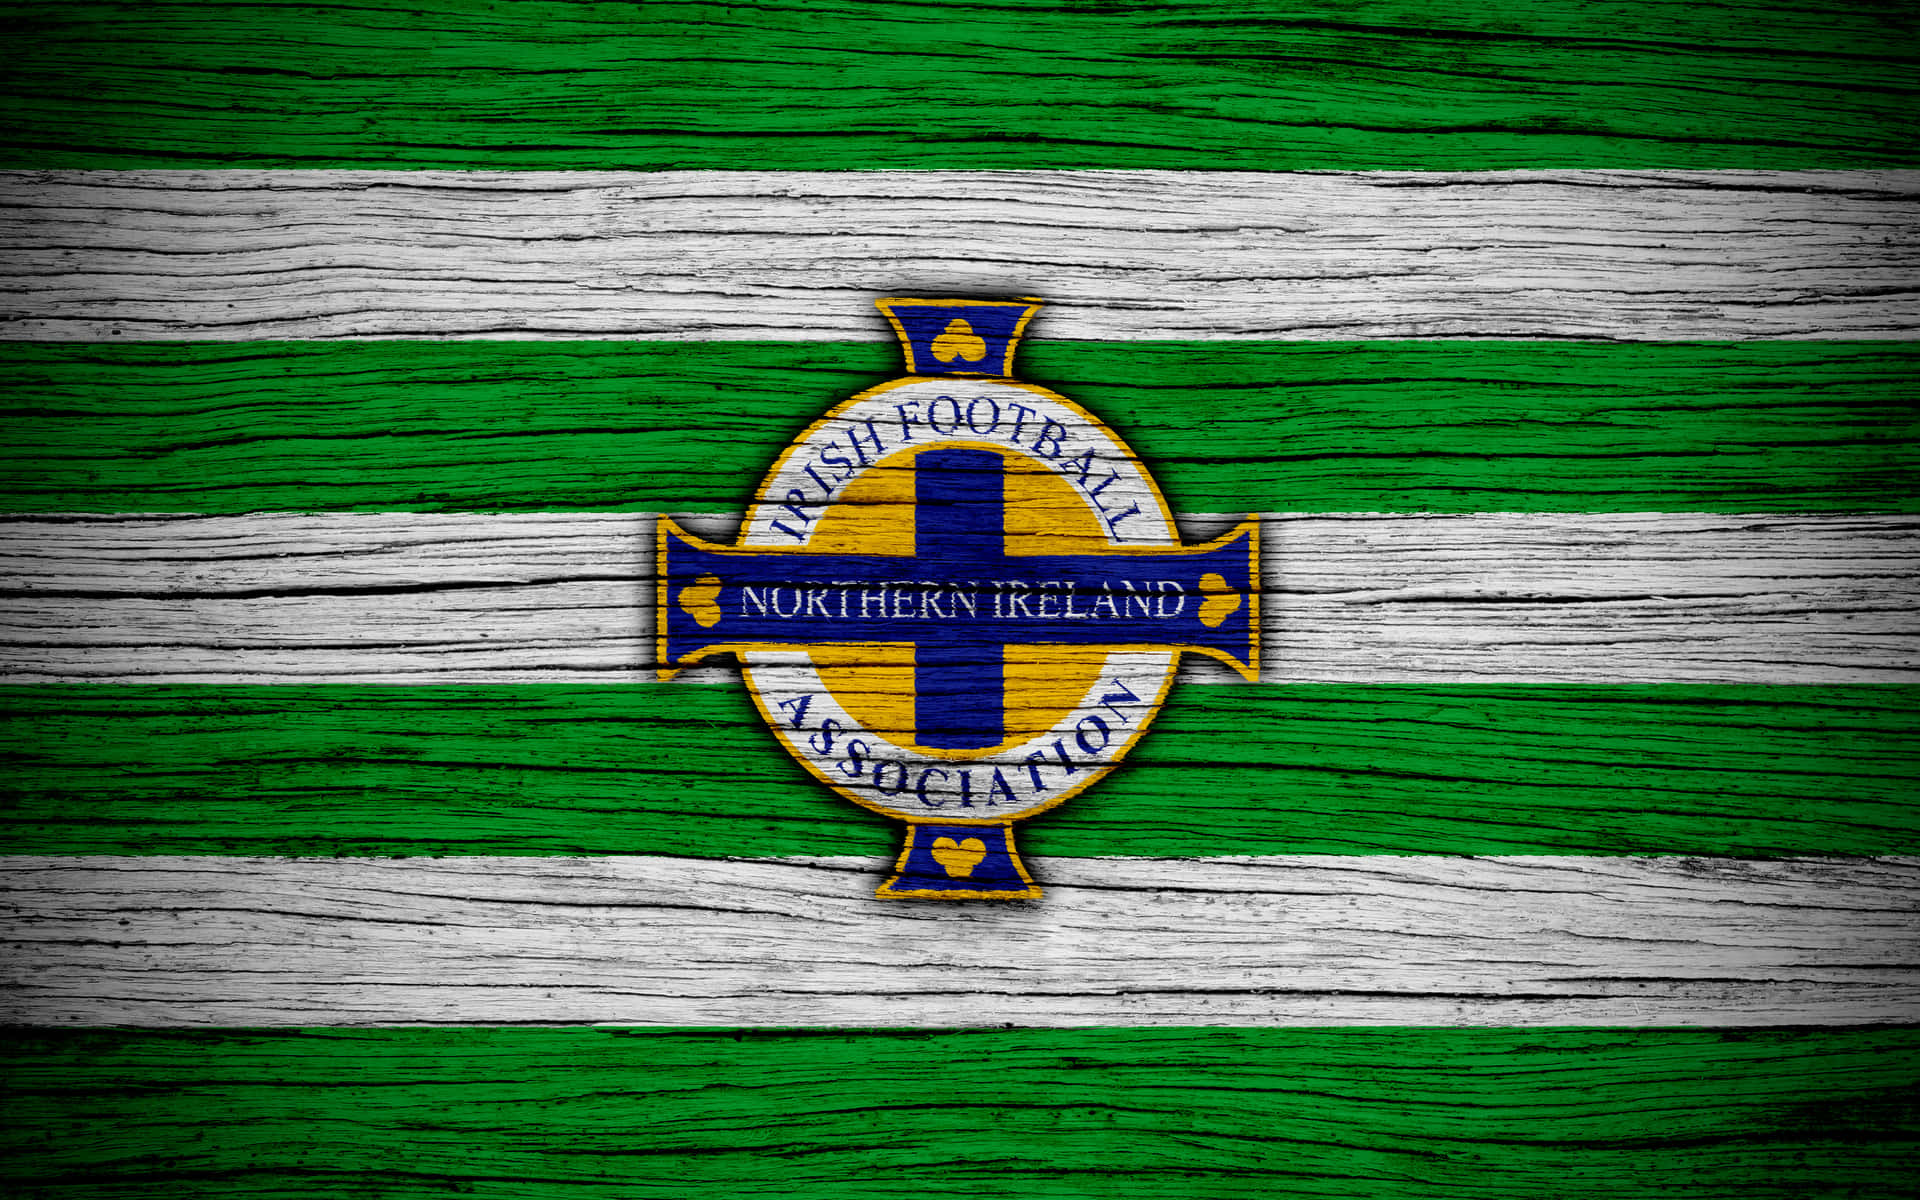 Northern Ireland Green And White Stripes Football Association Picture